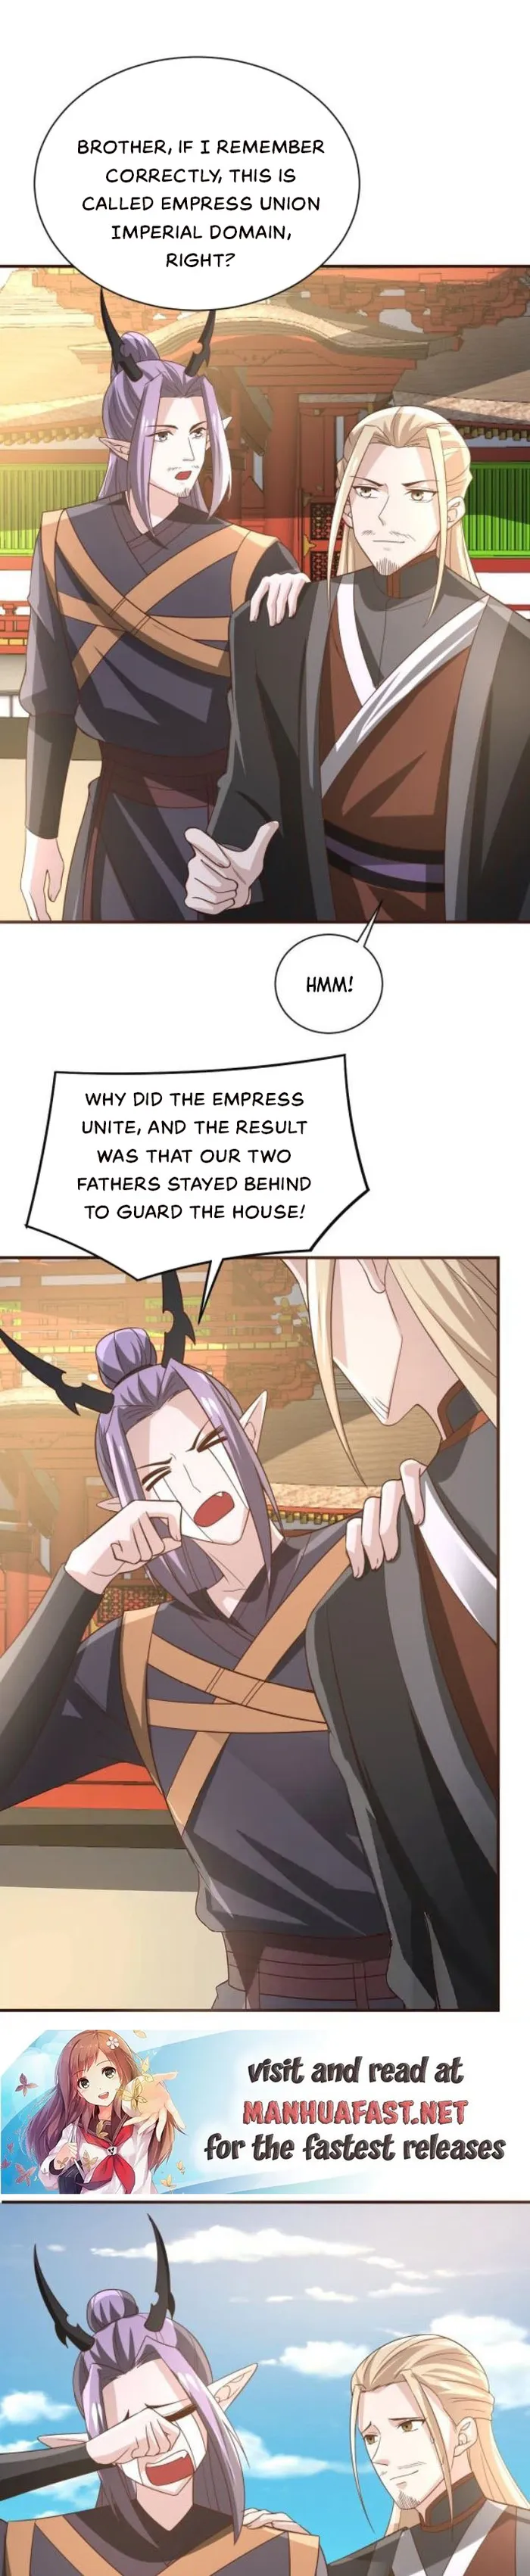 Empress’ Husband is Actually Invincible chapter 364